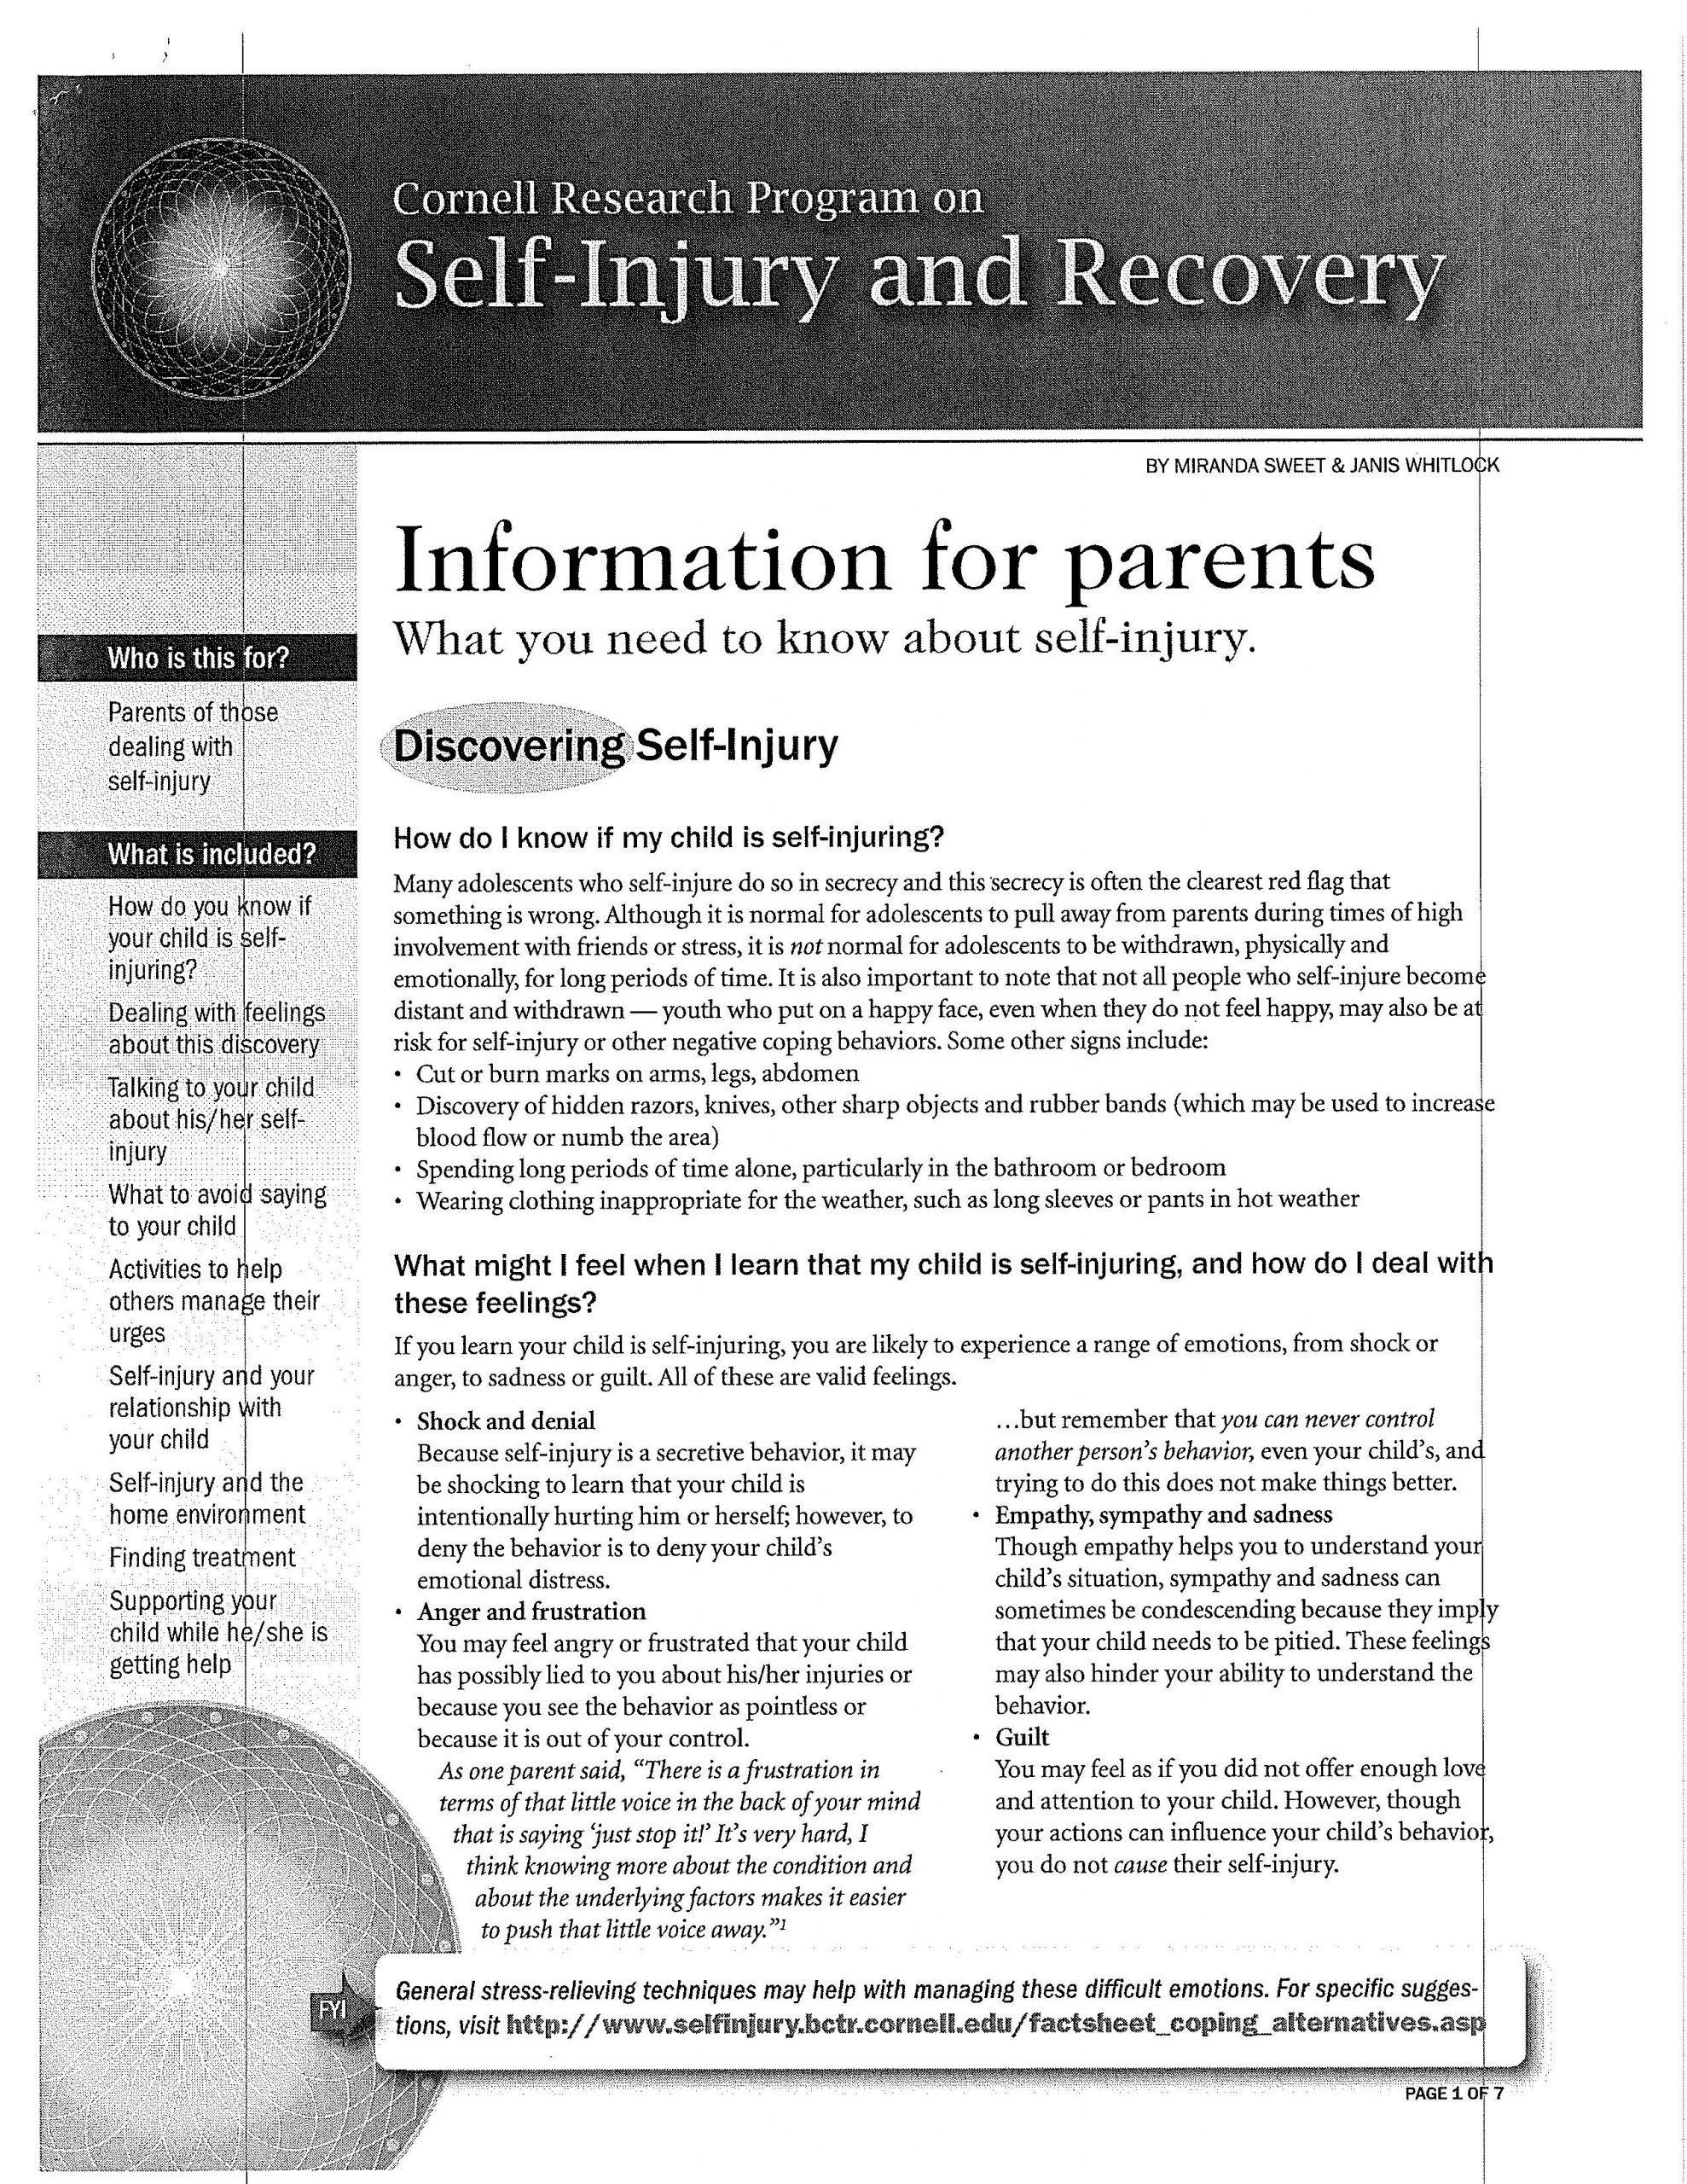 Self-Injury and Recovery Program